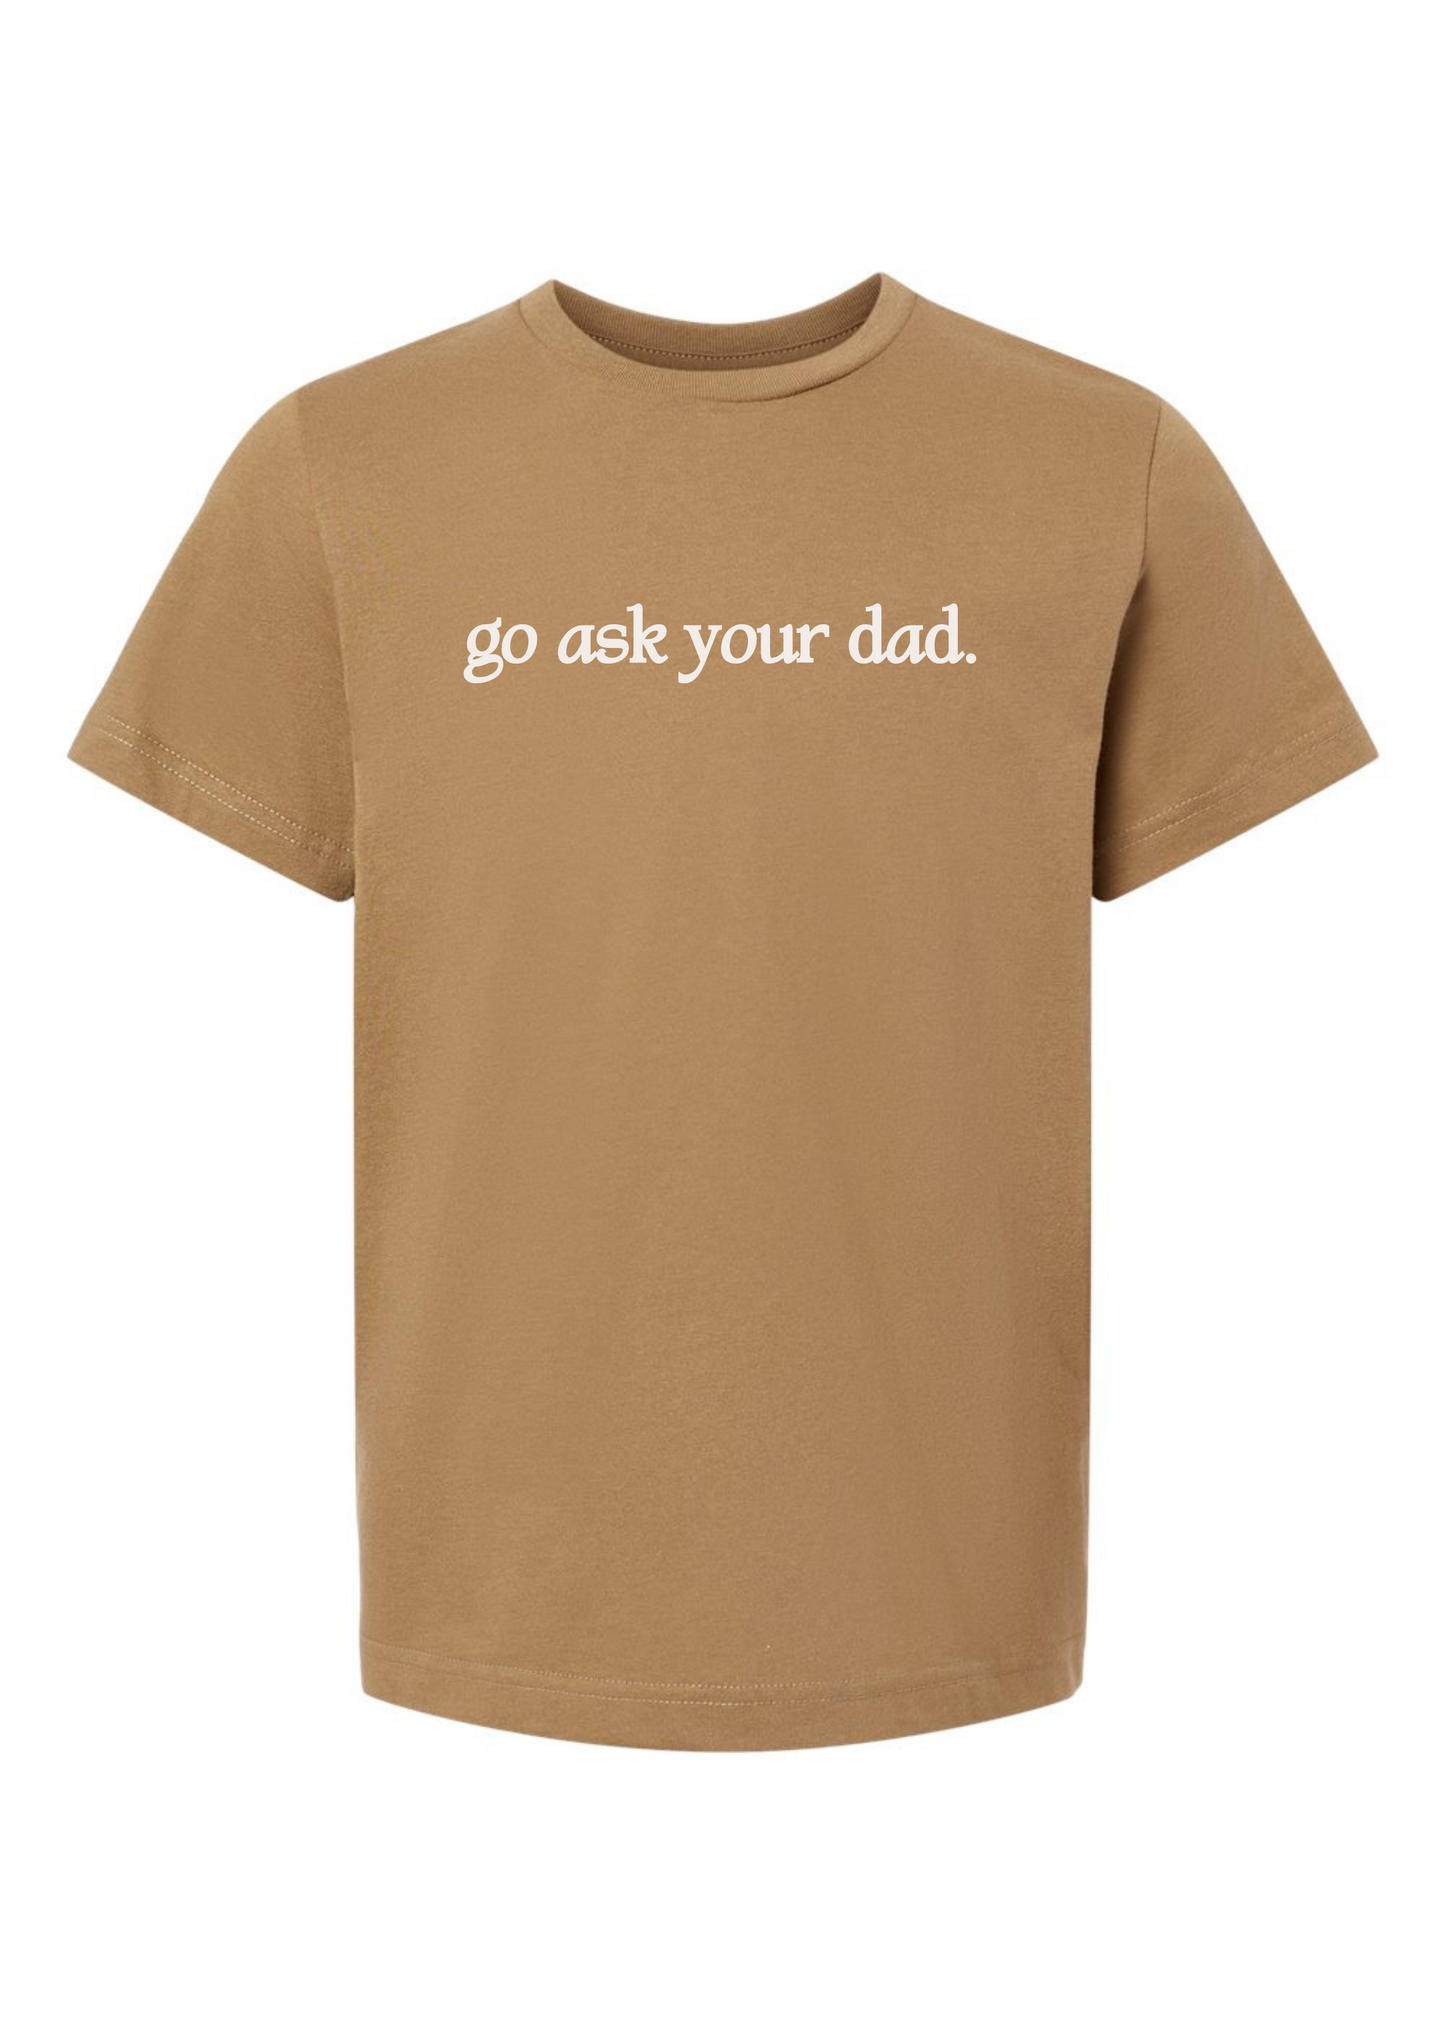 Go Ask Your Dad | Adult Tee-Adult Tee-Sister Shirts-Sister Shirts, Cute & Custom Tees for Mama & Littles in Trussville, Alabama.